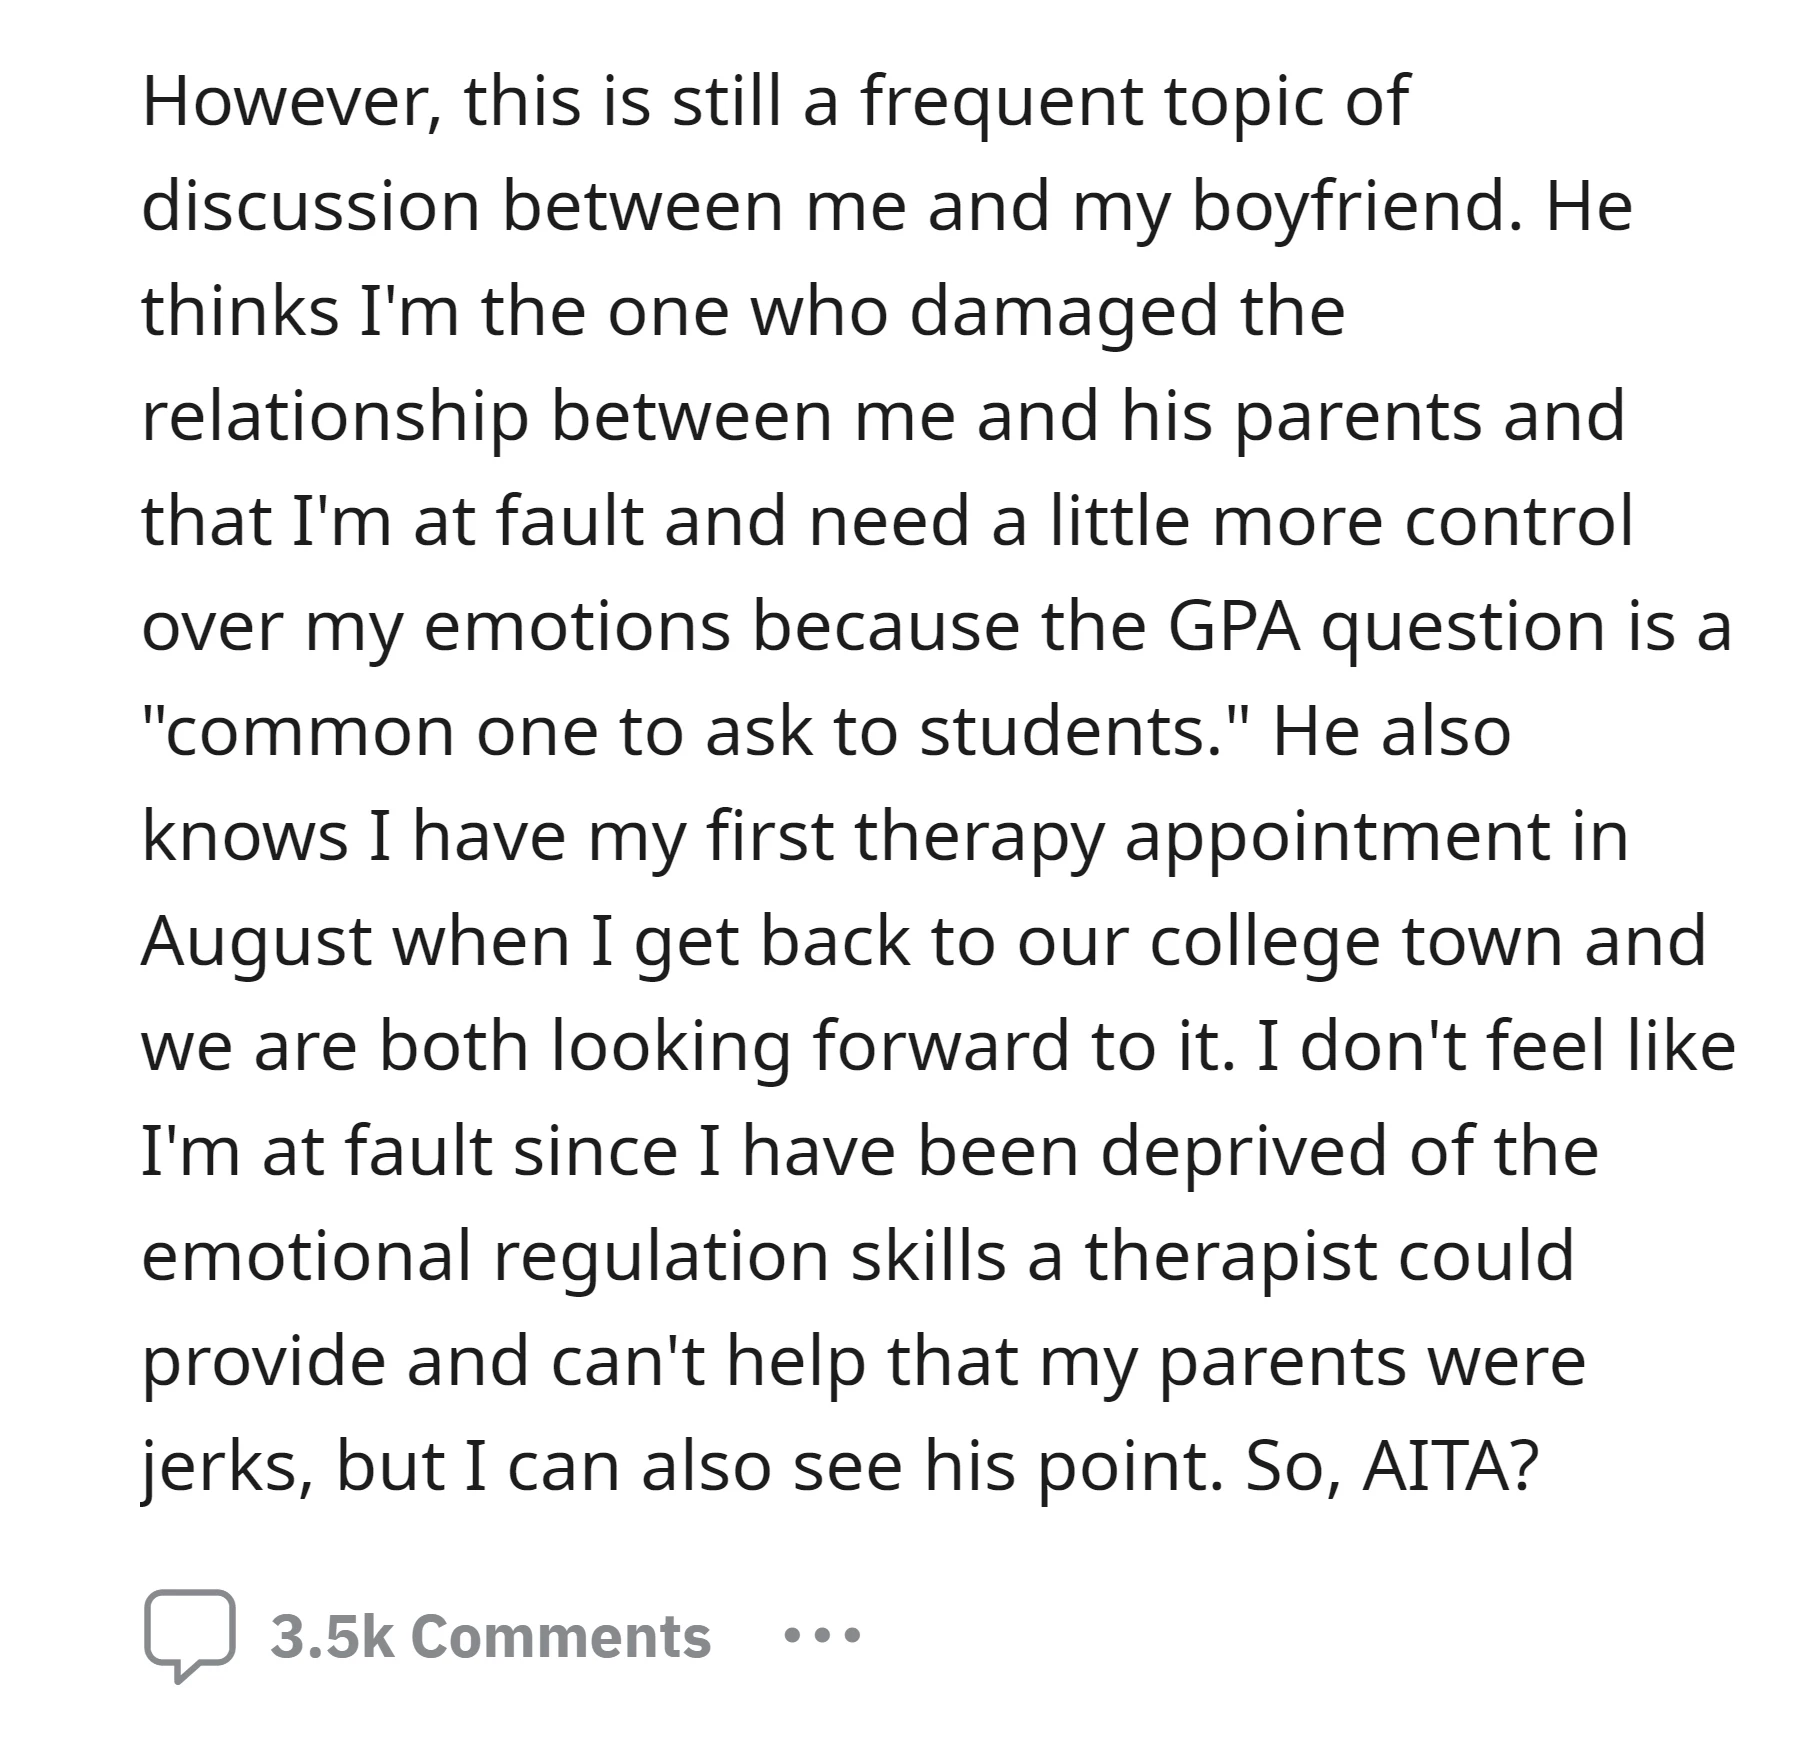 OP have sought therapy to address emotional regulation issues